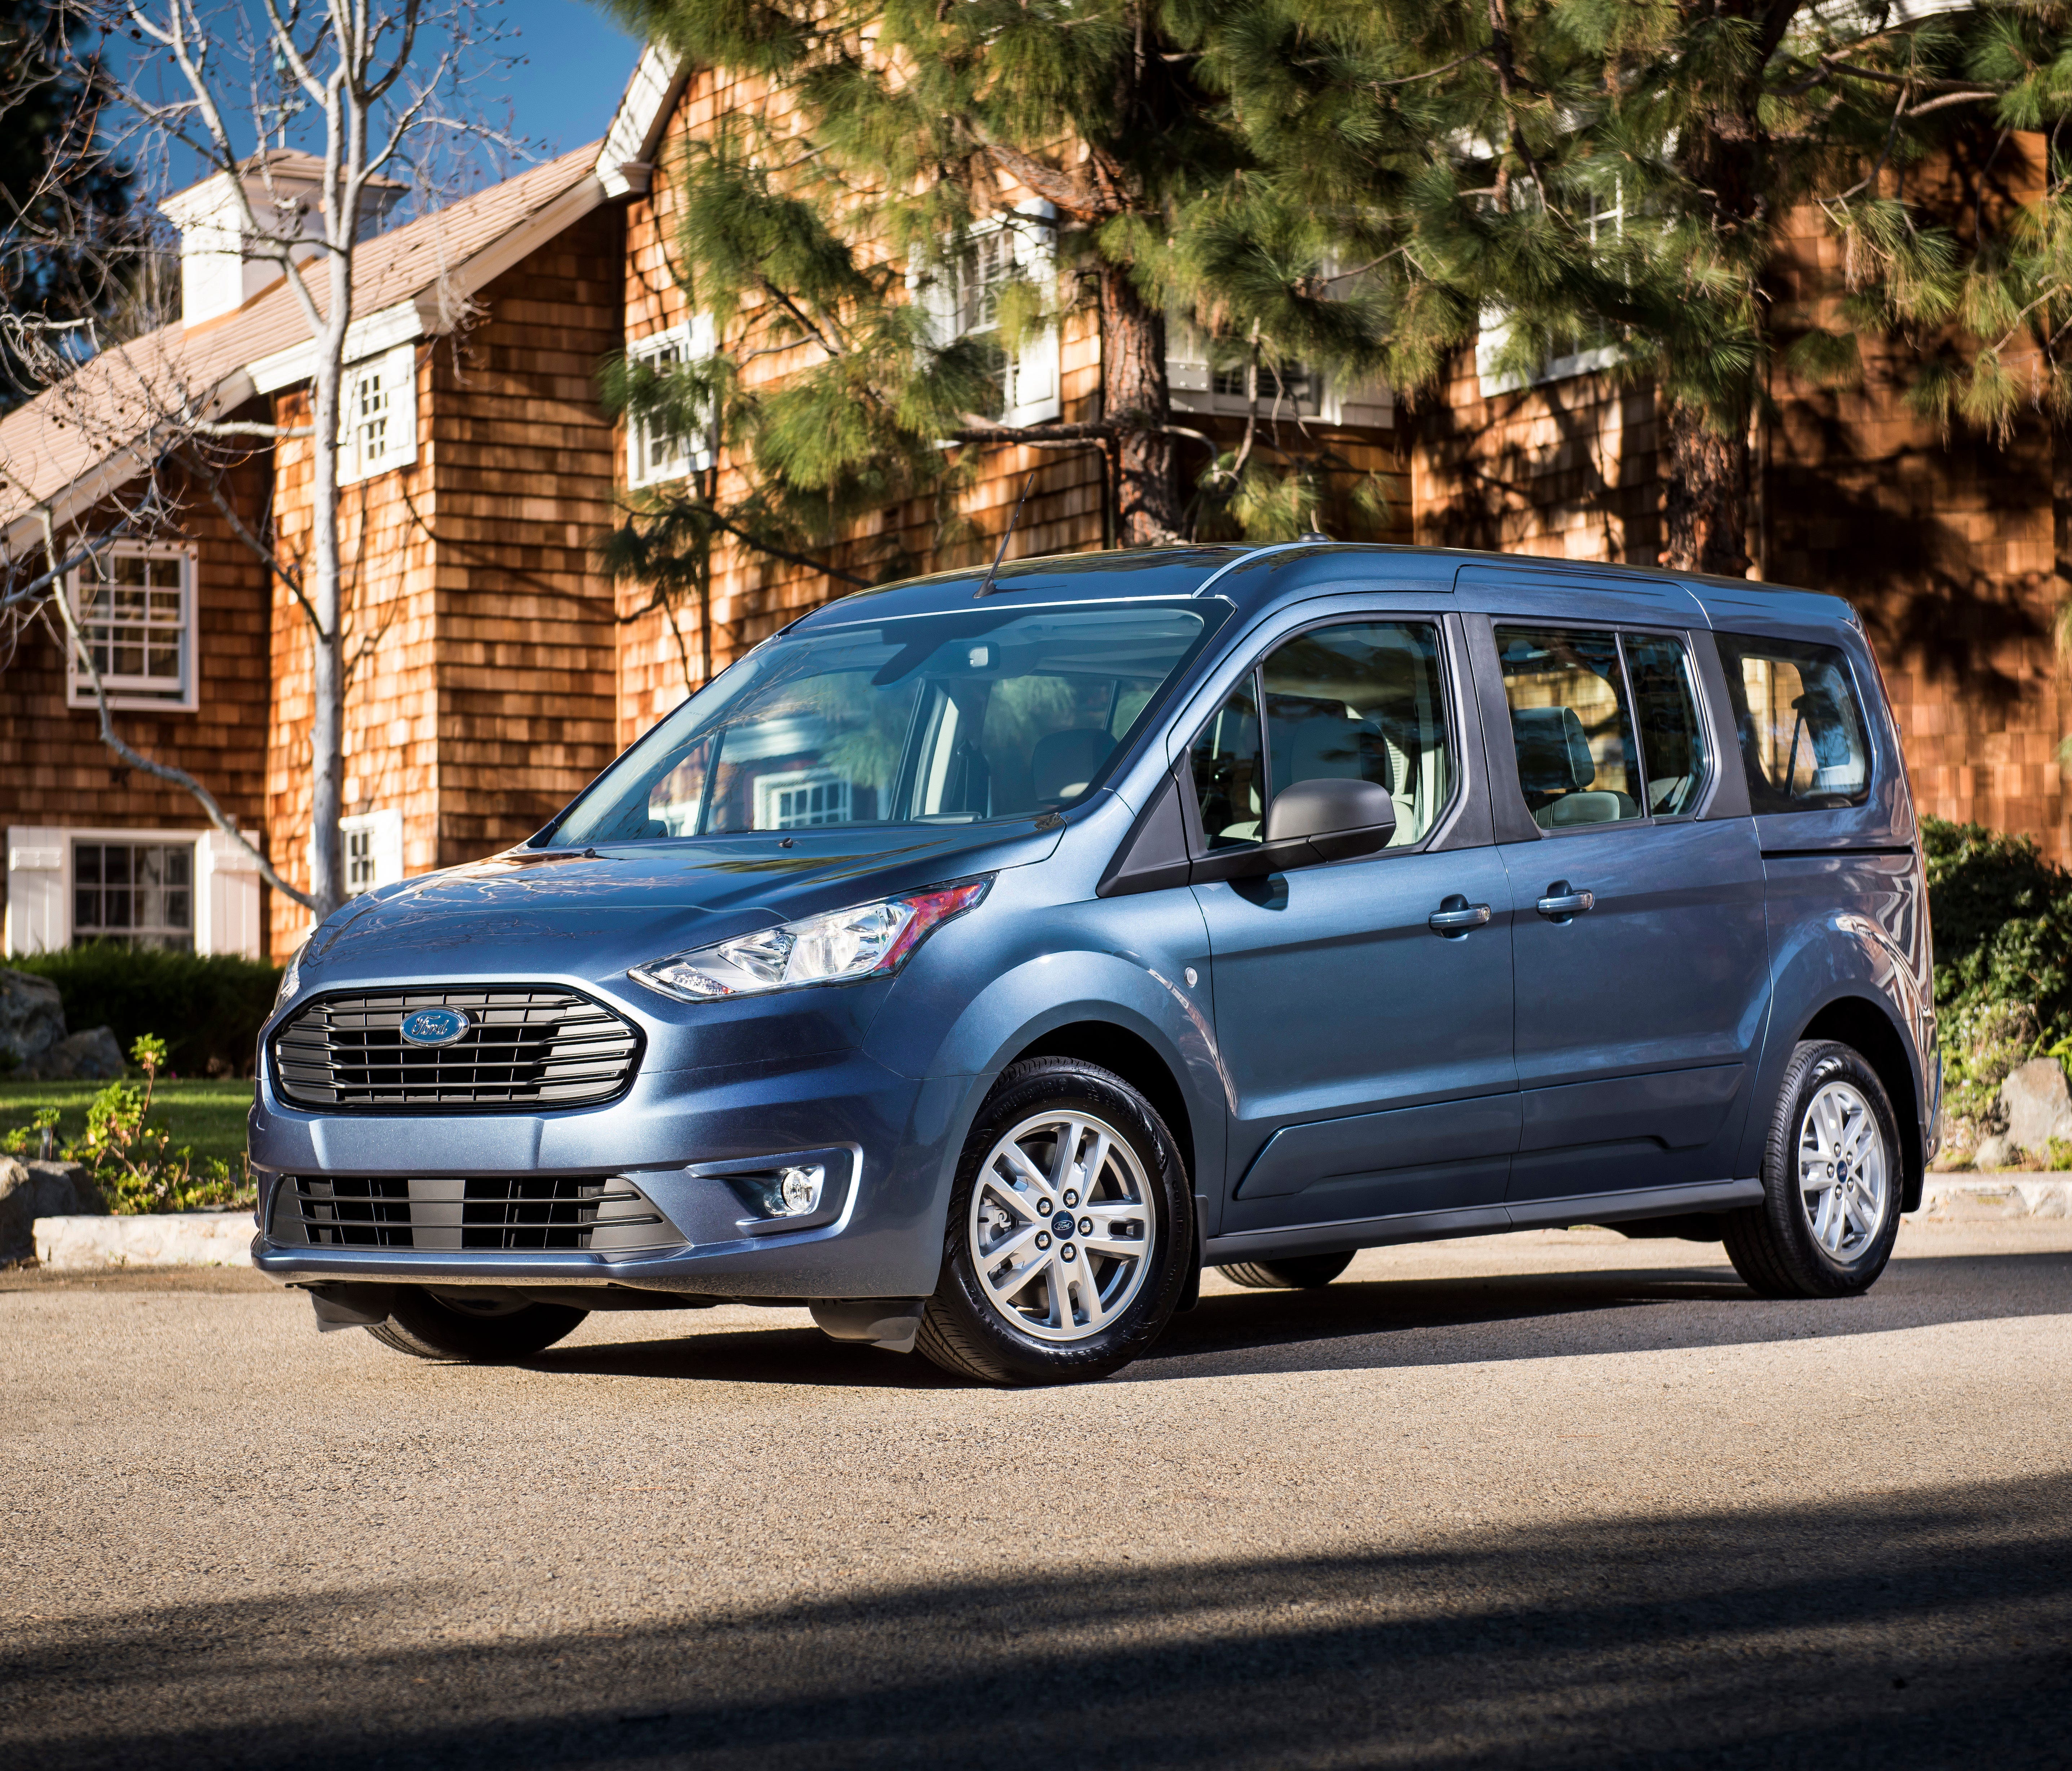 Another view of the 2019 Ford Transit Connect van